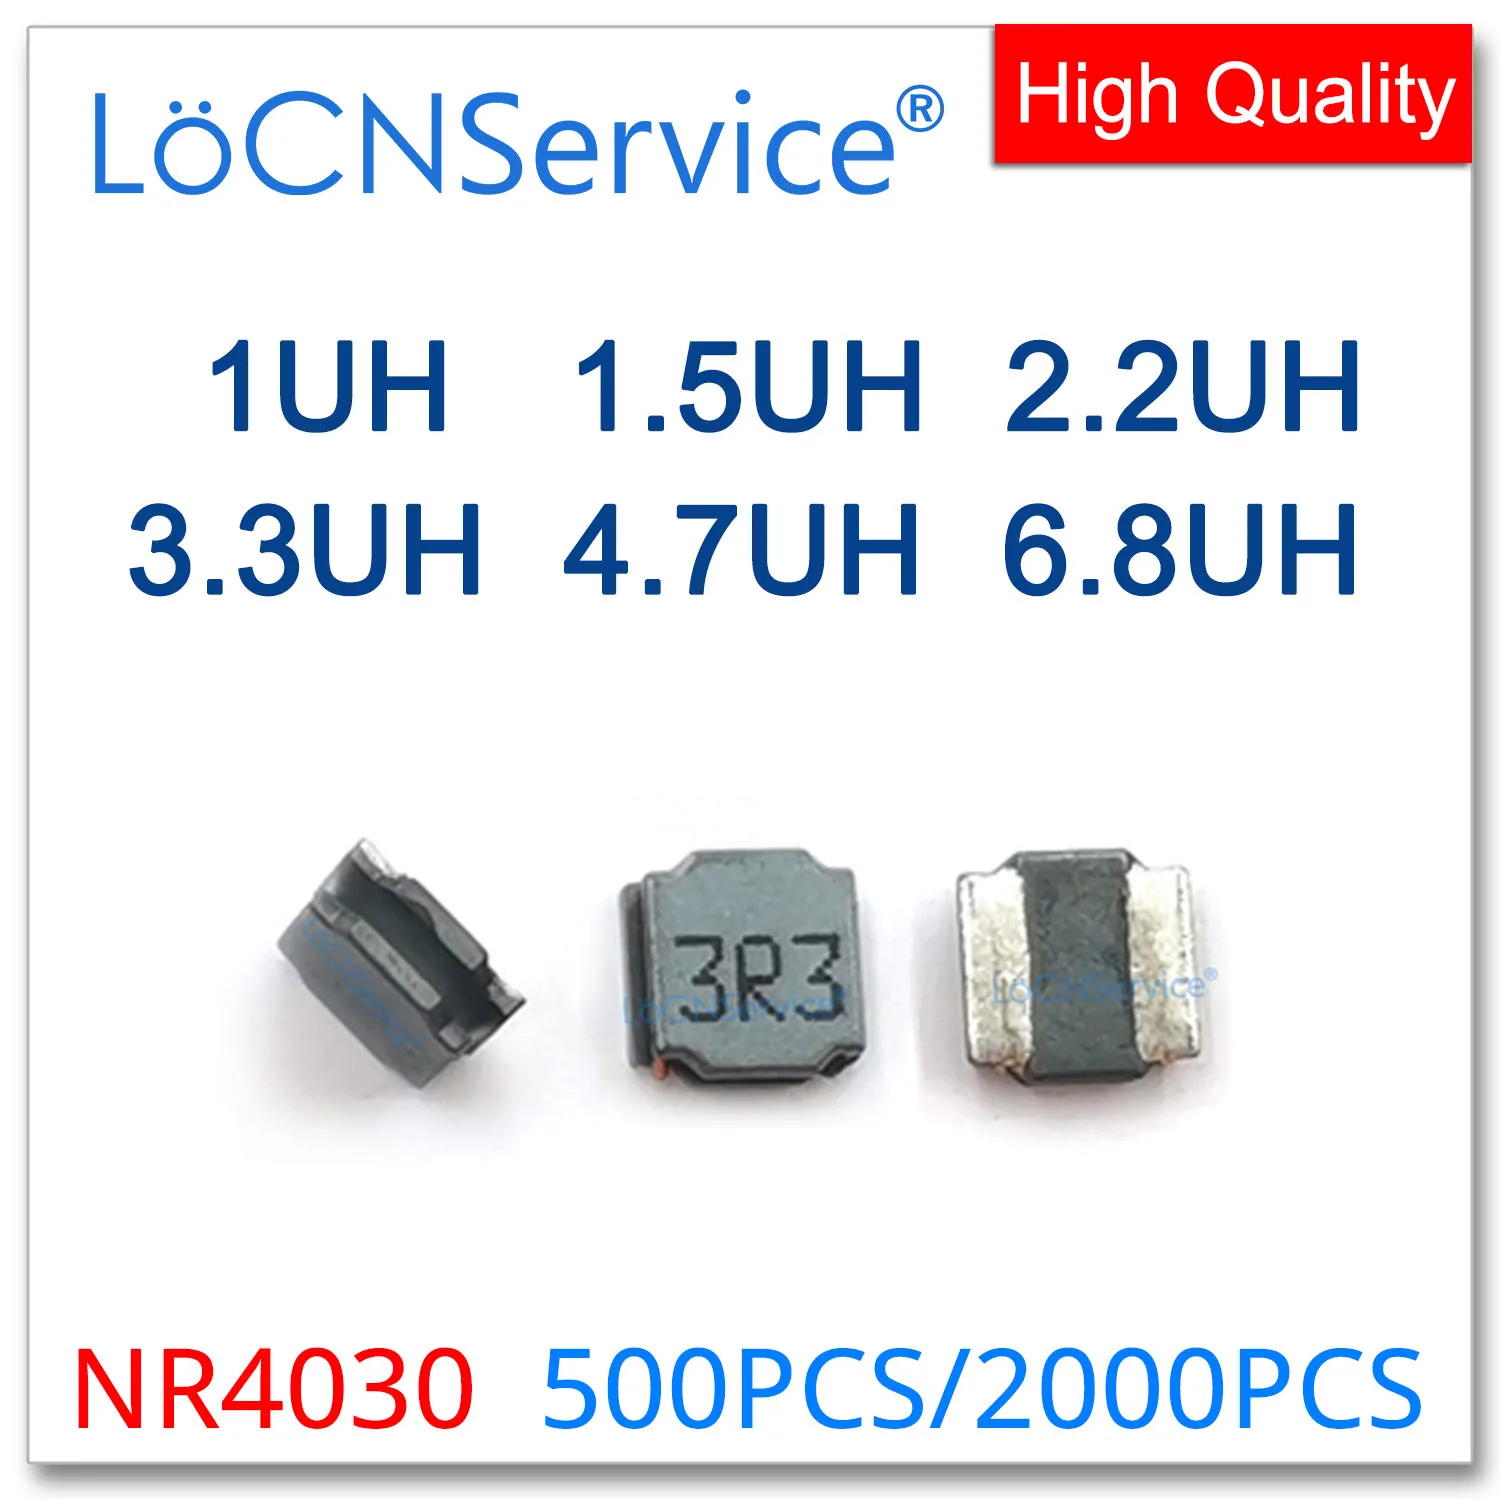 

LoCNService 500PCS 2000PCS NR4030 4.0*4.0*3.0 SMD 1UH 1.5UH 2.2UH 3.3UH 4.7UH 6.8UH SMT Shielded Power Inductors High Quality